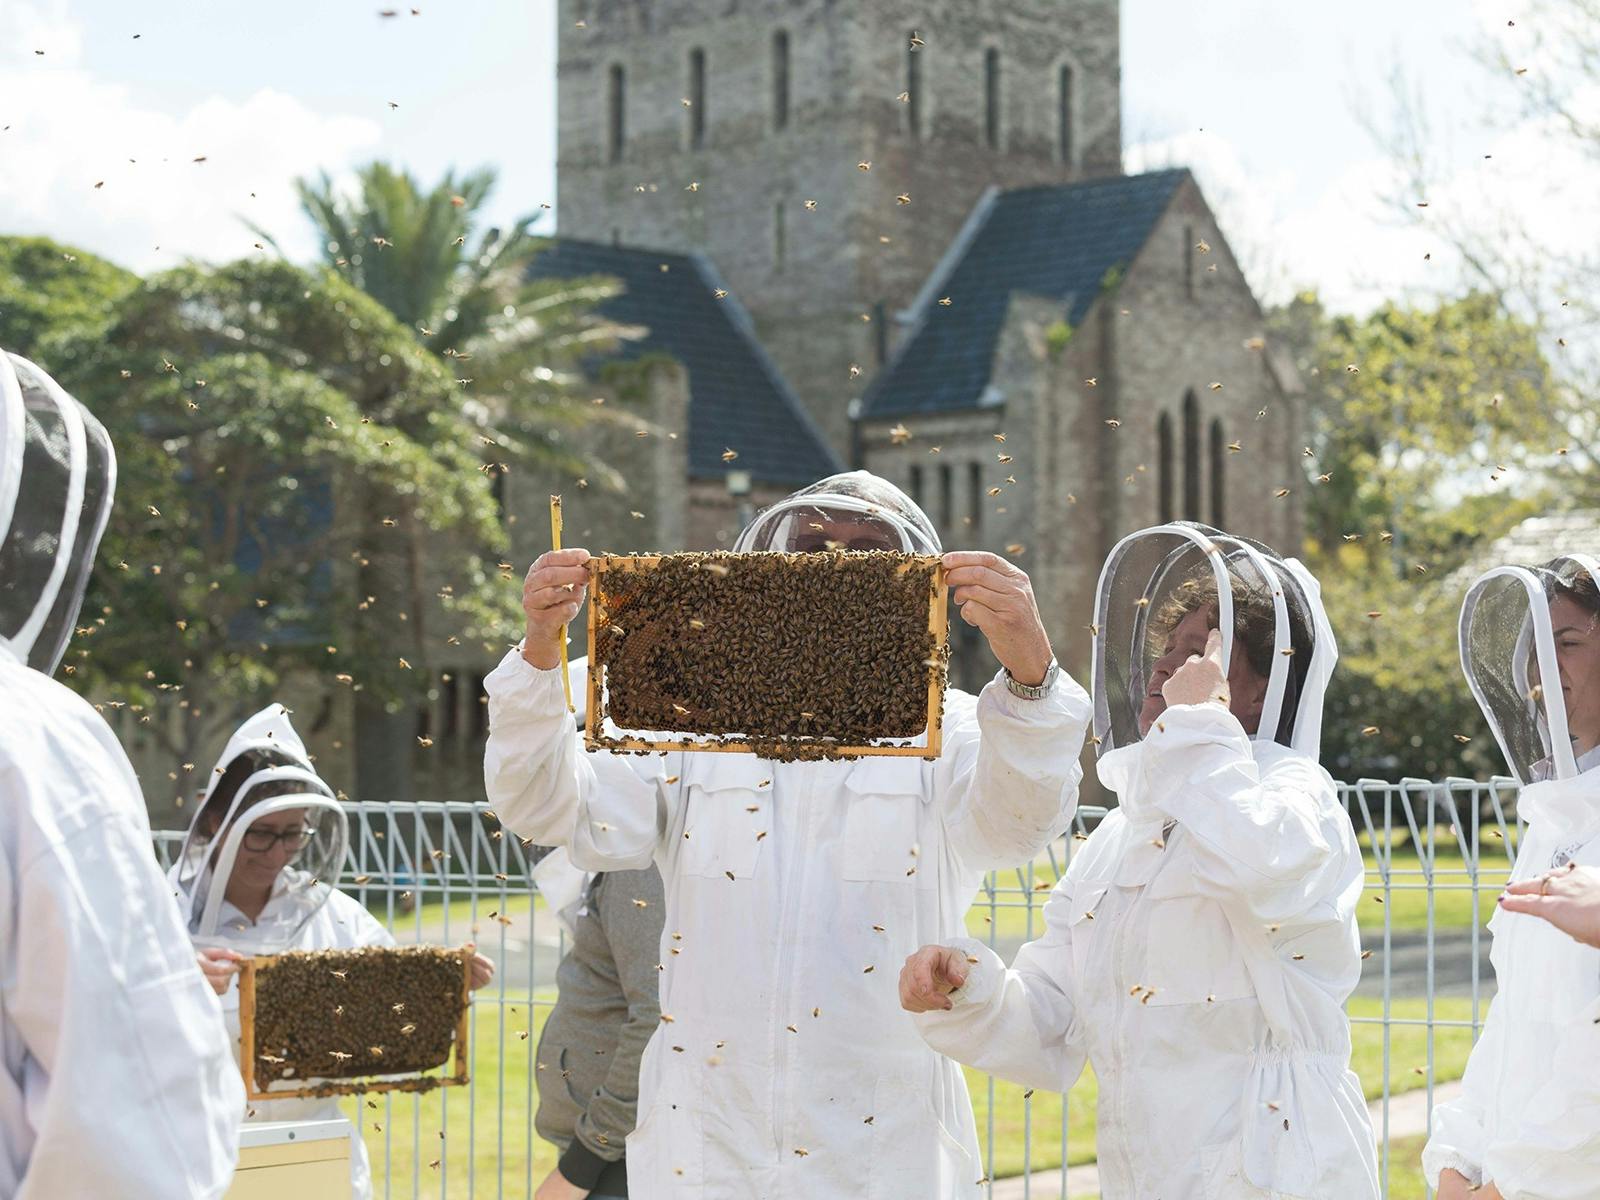 Backyard Beekeeping workshop with students looking at a frame of honey bees.